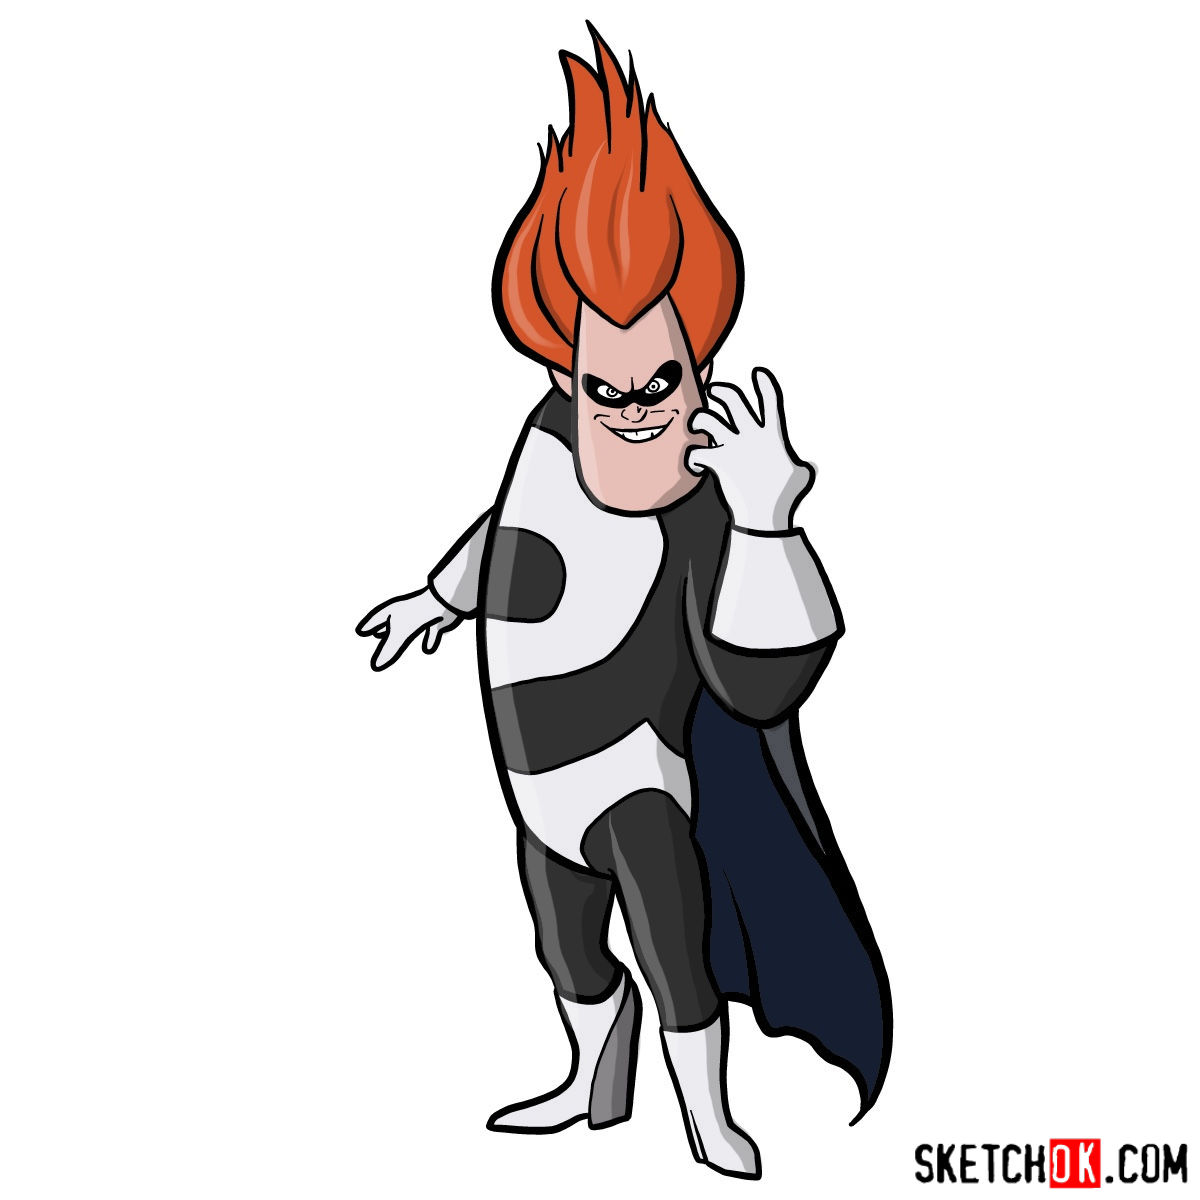 How to draw Buddy Pine (Syndrome) from The Incredibles